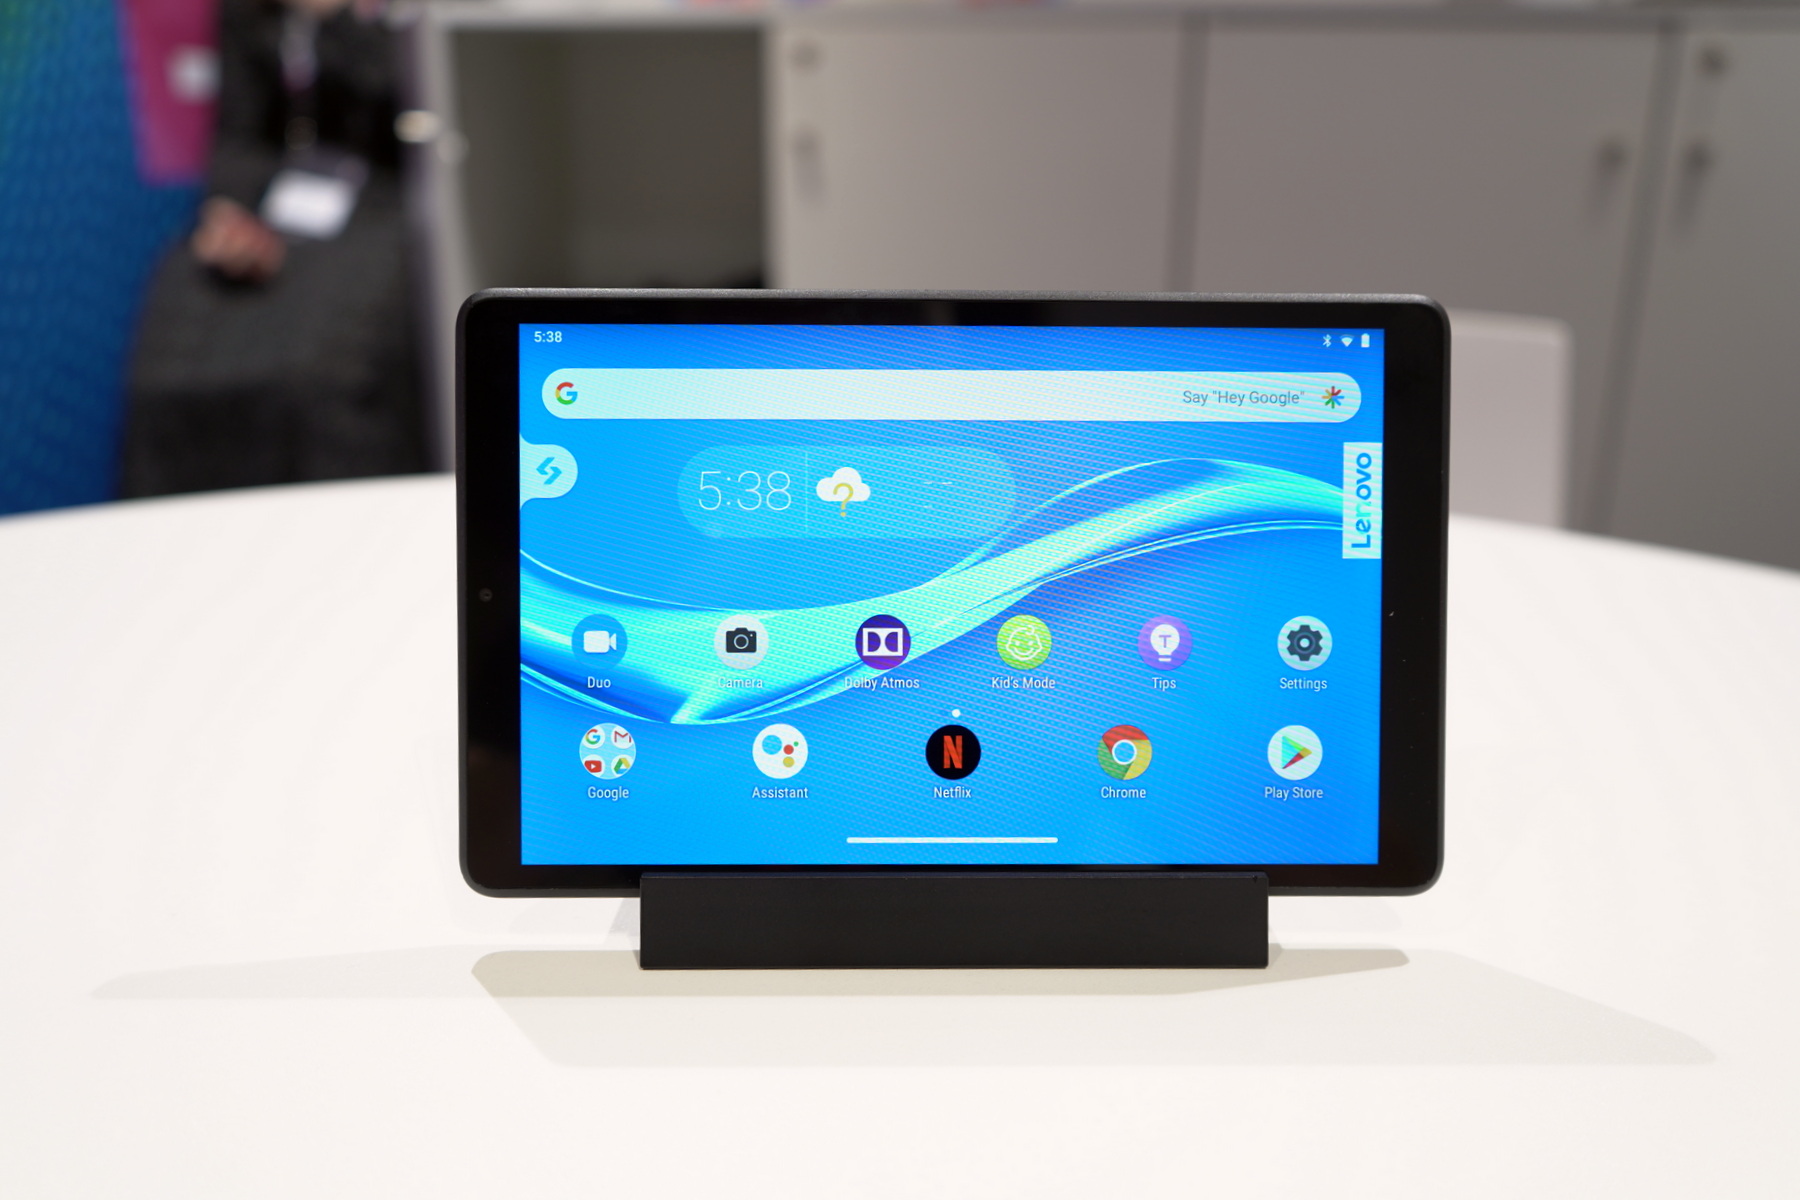 Lenovo Smart Tab M8 hands-on: the future of tablets – Phandroid